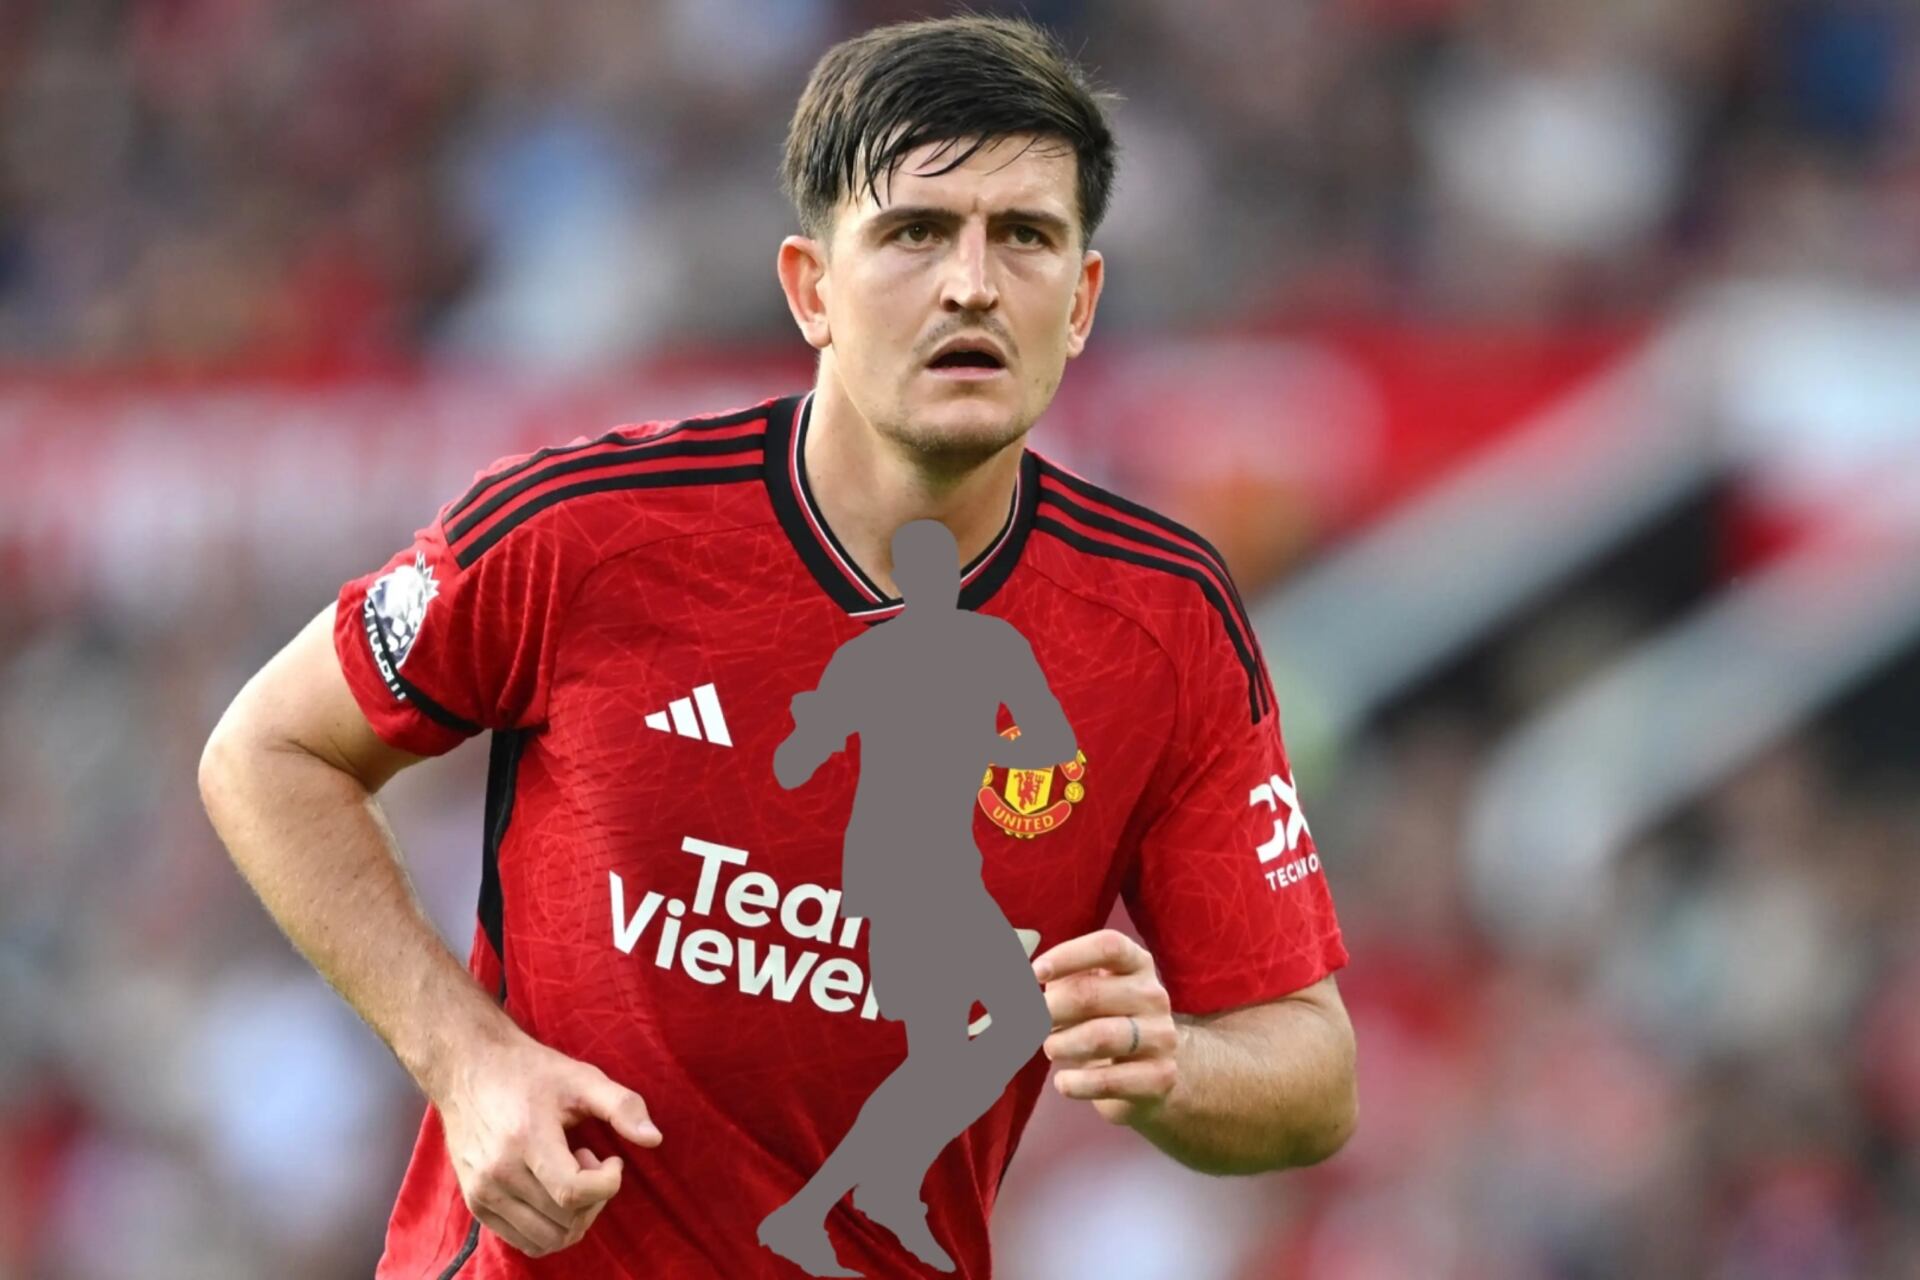 He makes more mistakes than Maguire and yet Man United want to sign him; the Red Devils could make a mistake  